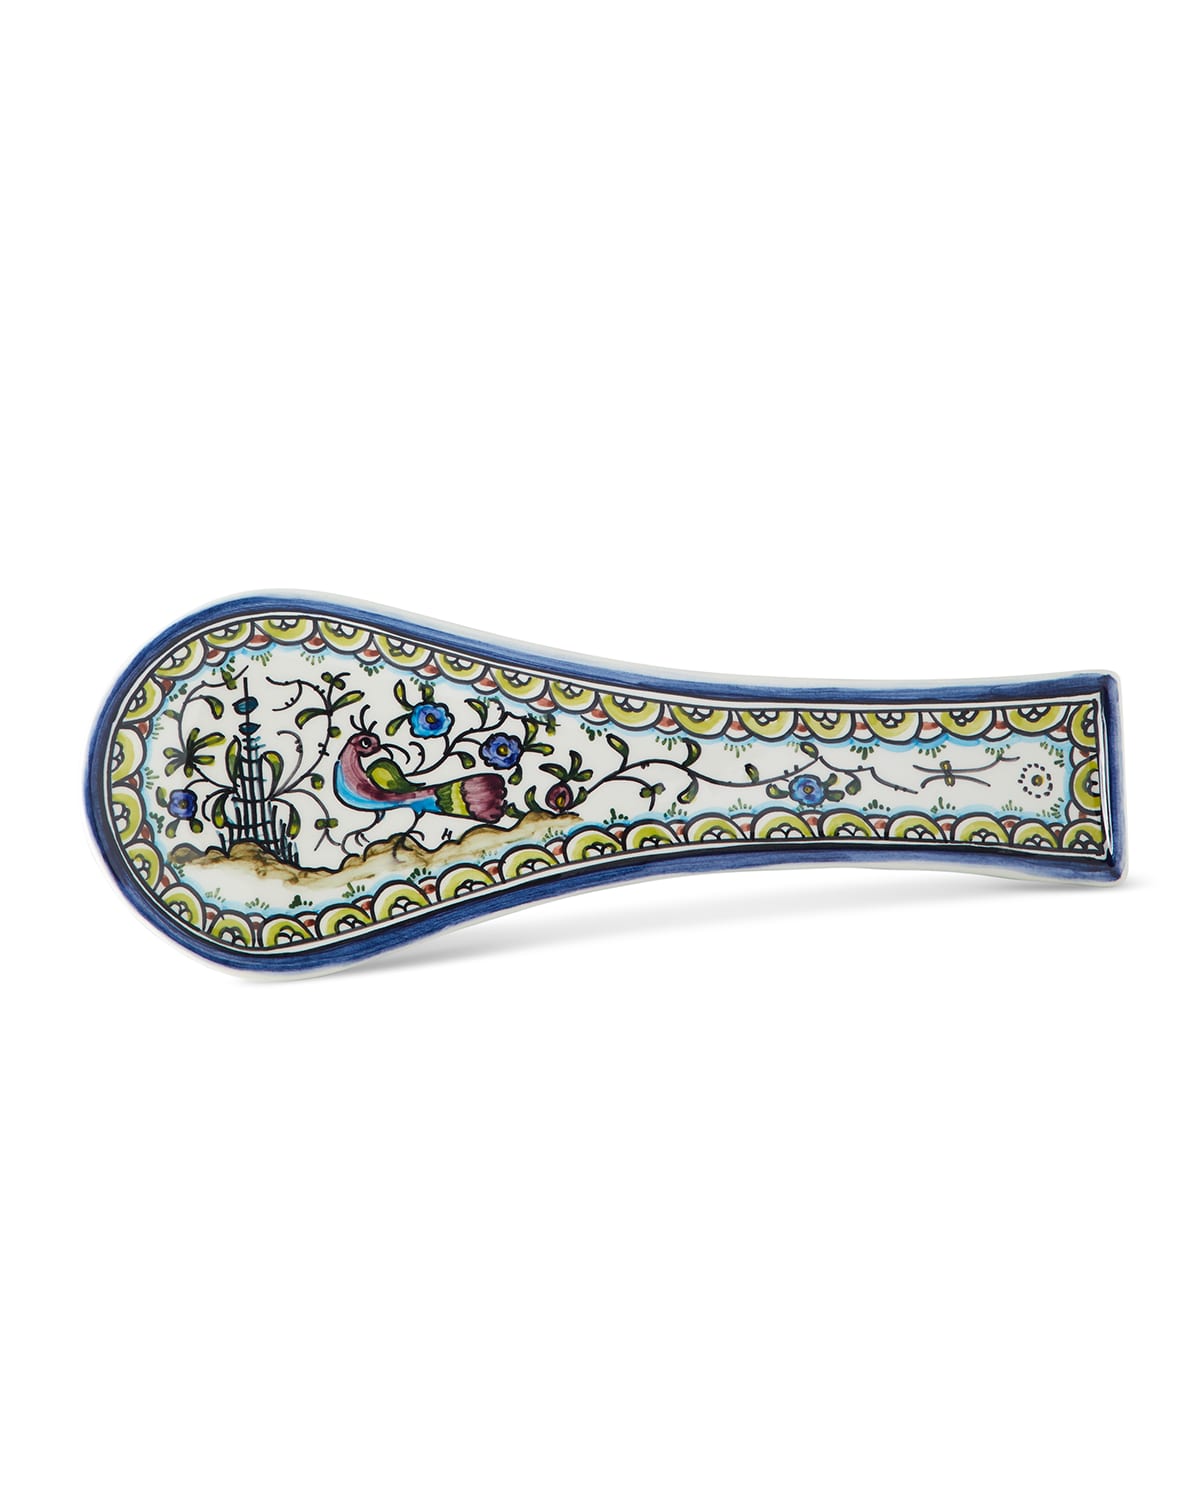 Neiman Marcus Pavoes Blue And Green Spoon Rest